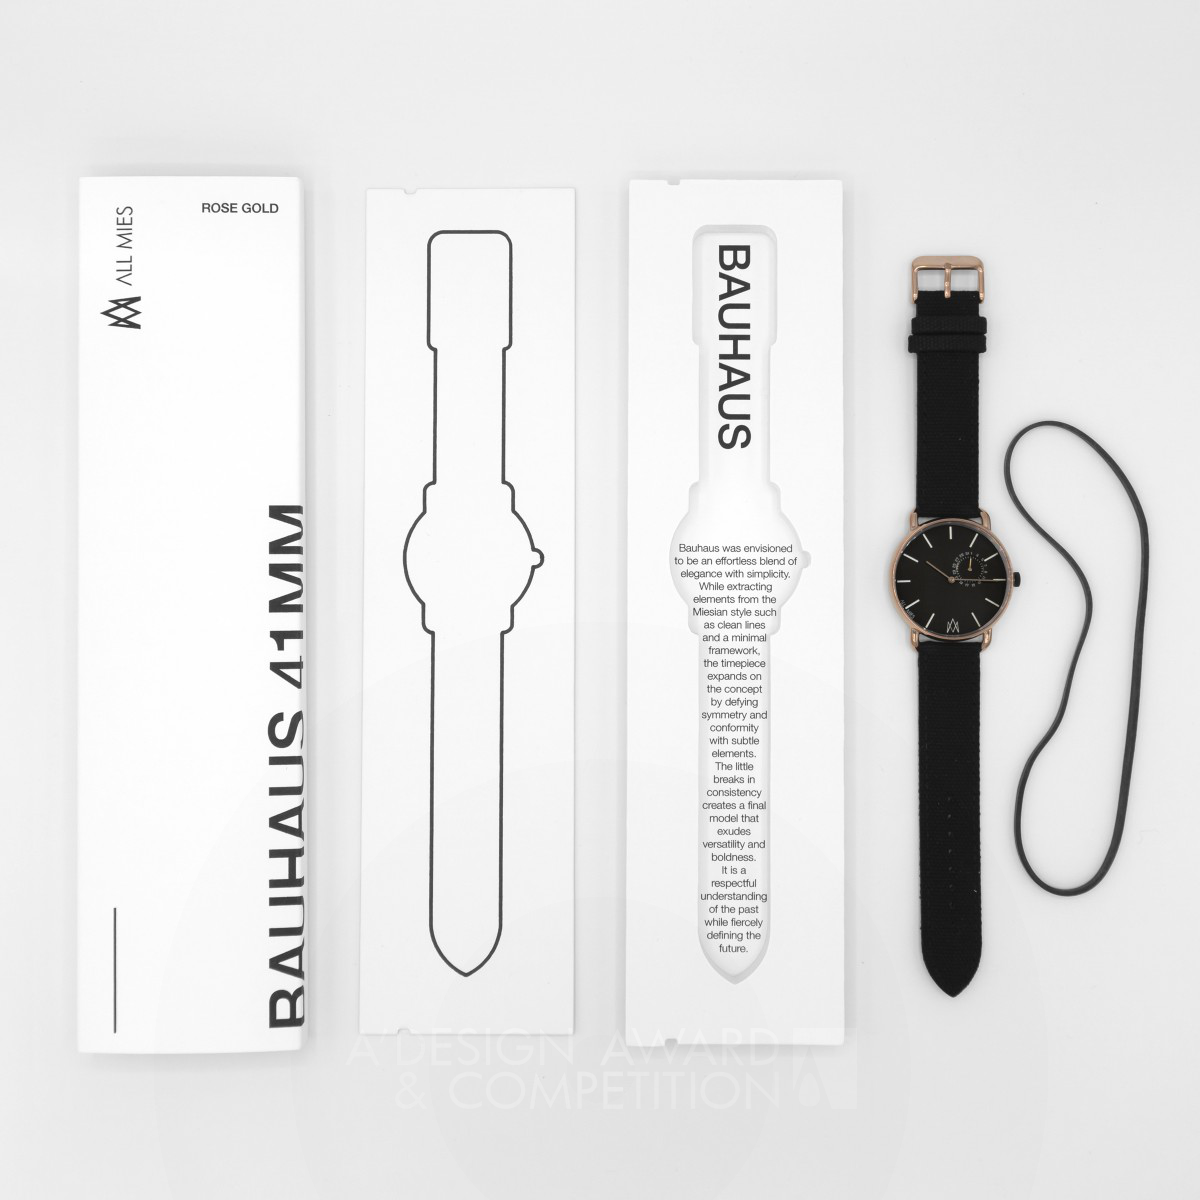 All Mies Watch Packaging by Walmir Luz